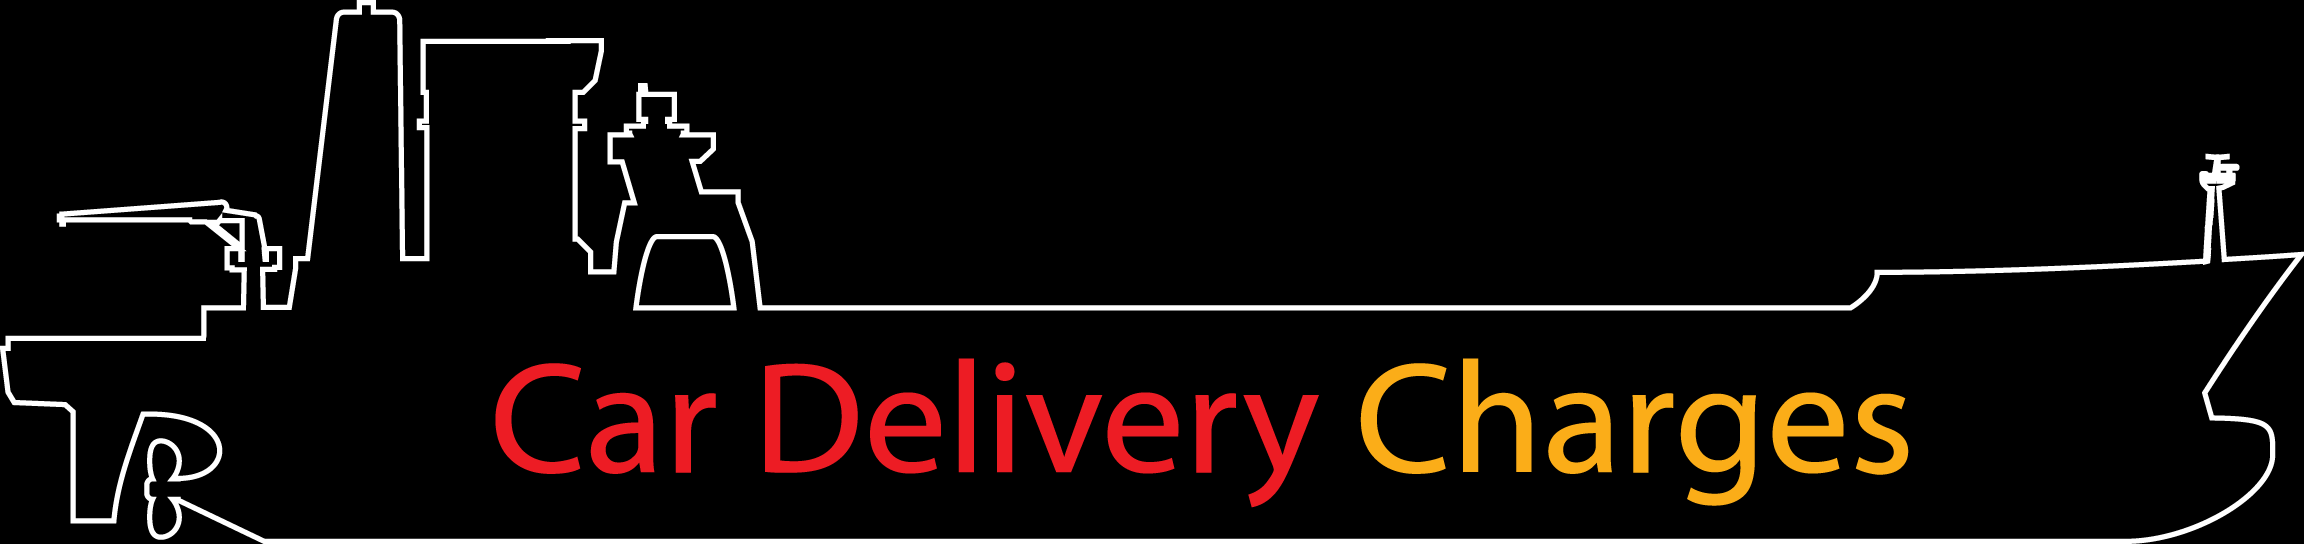 Car Delivery Charges Logo